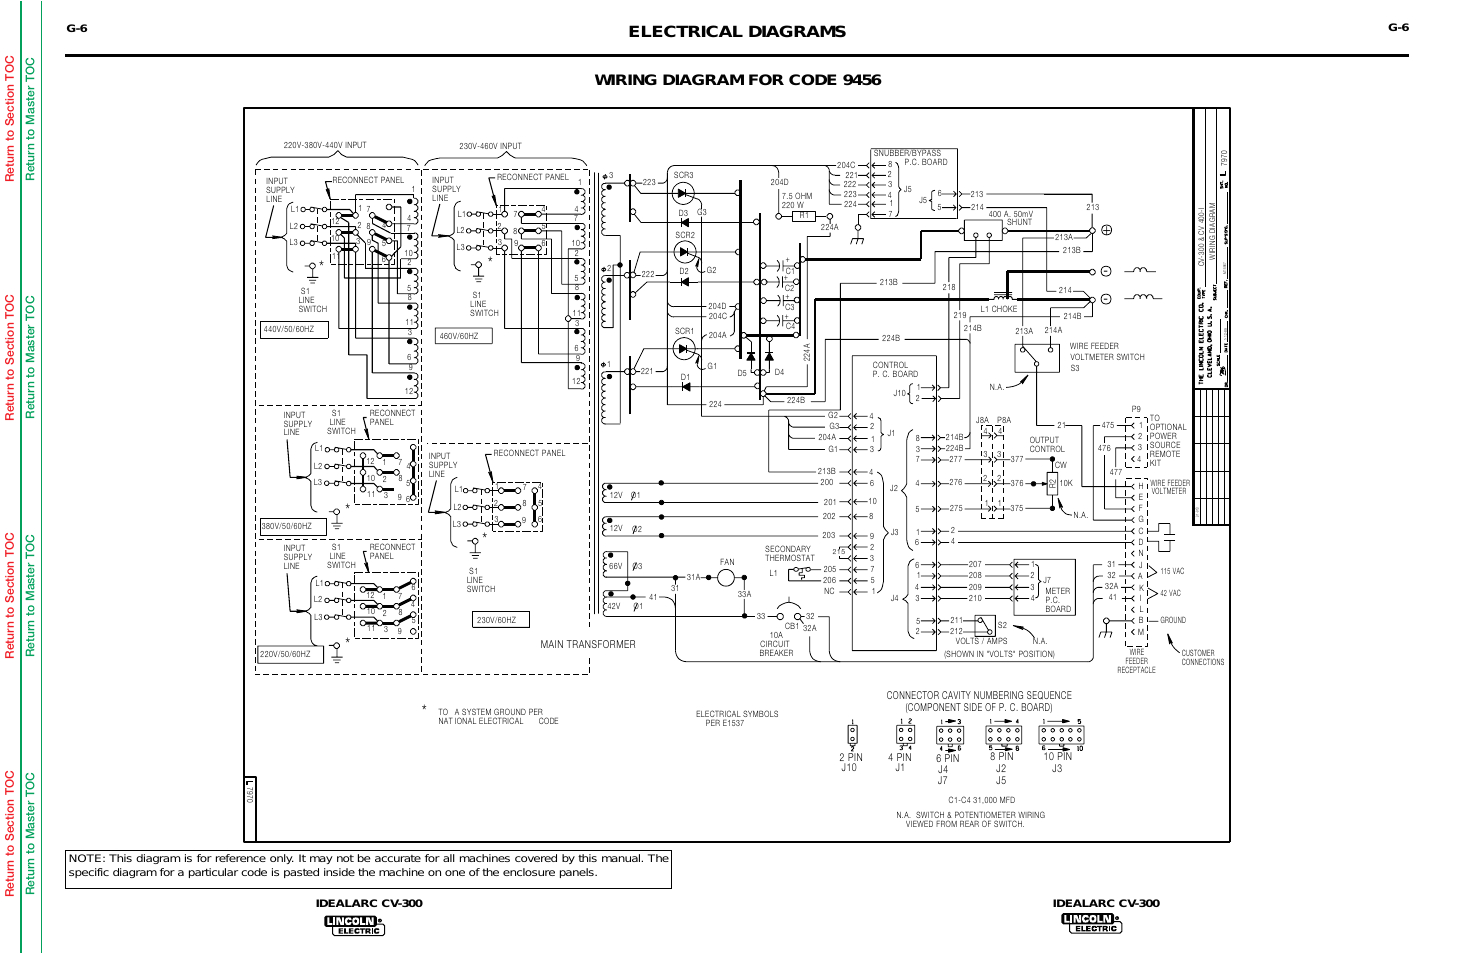 electrical diagrams wiring diagram for code